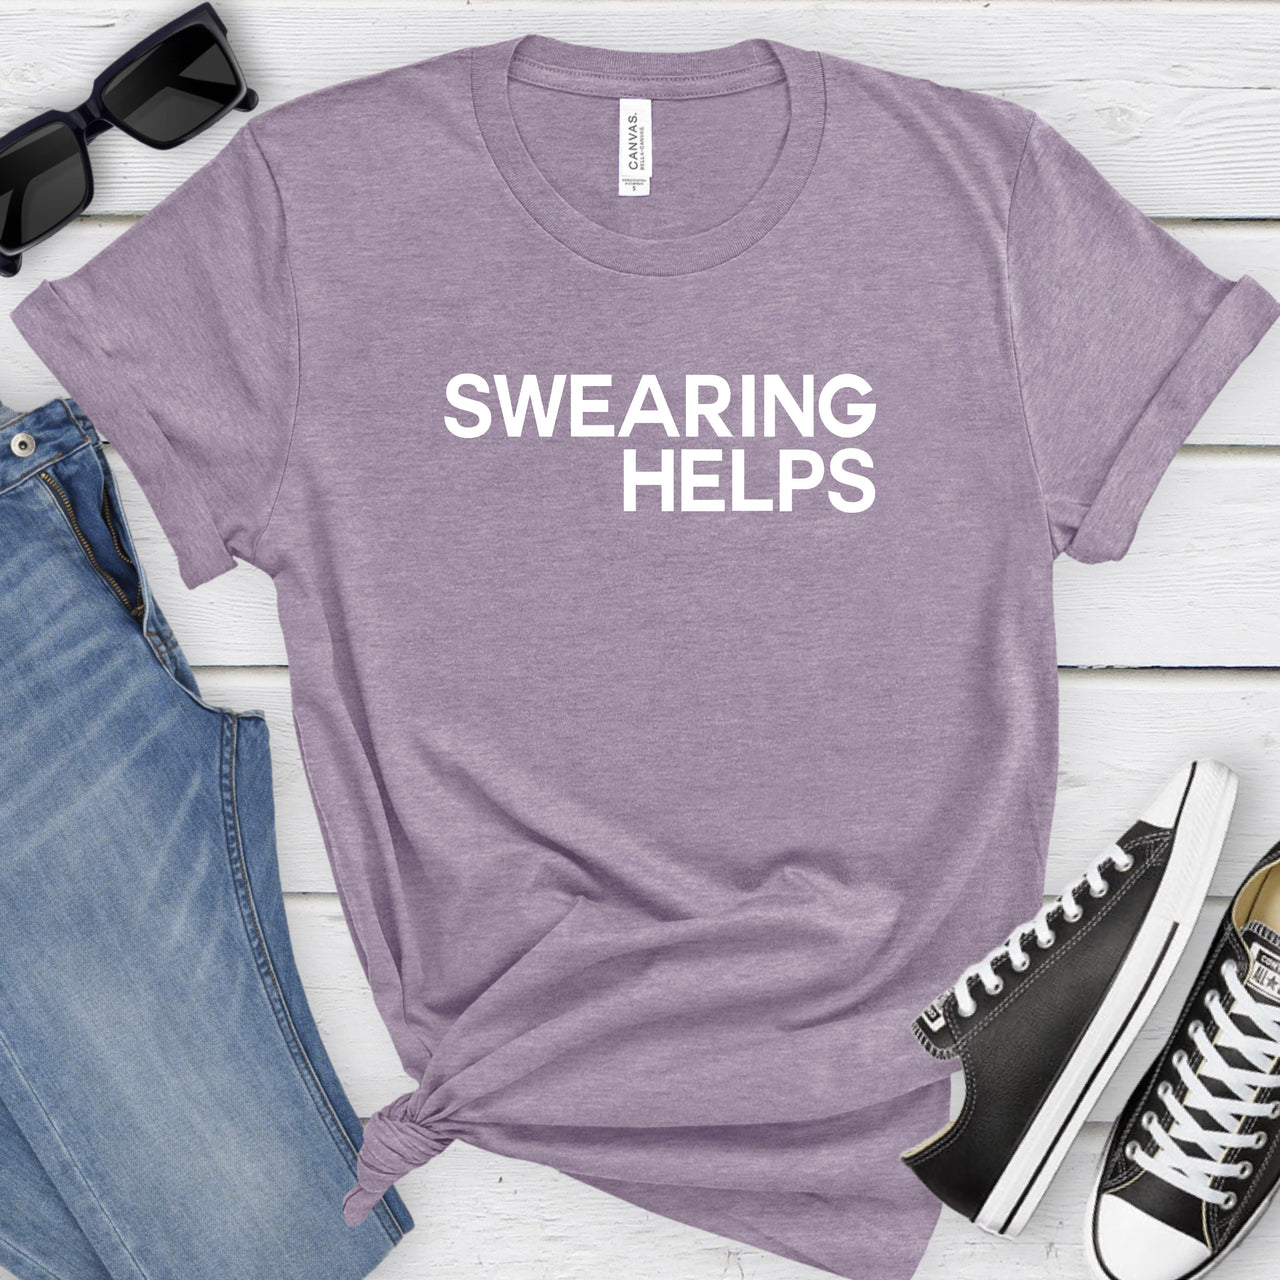 Swearing Helps - Unisex Cotton/Poly Tee